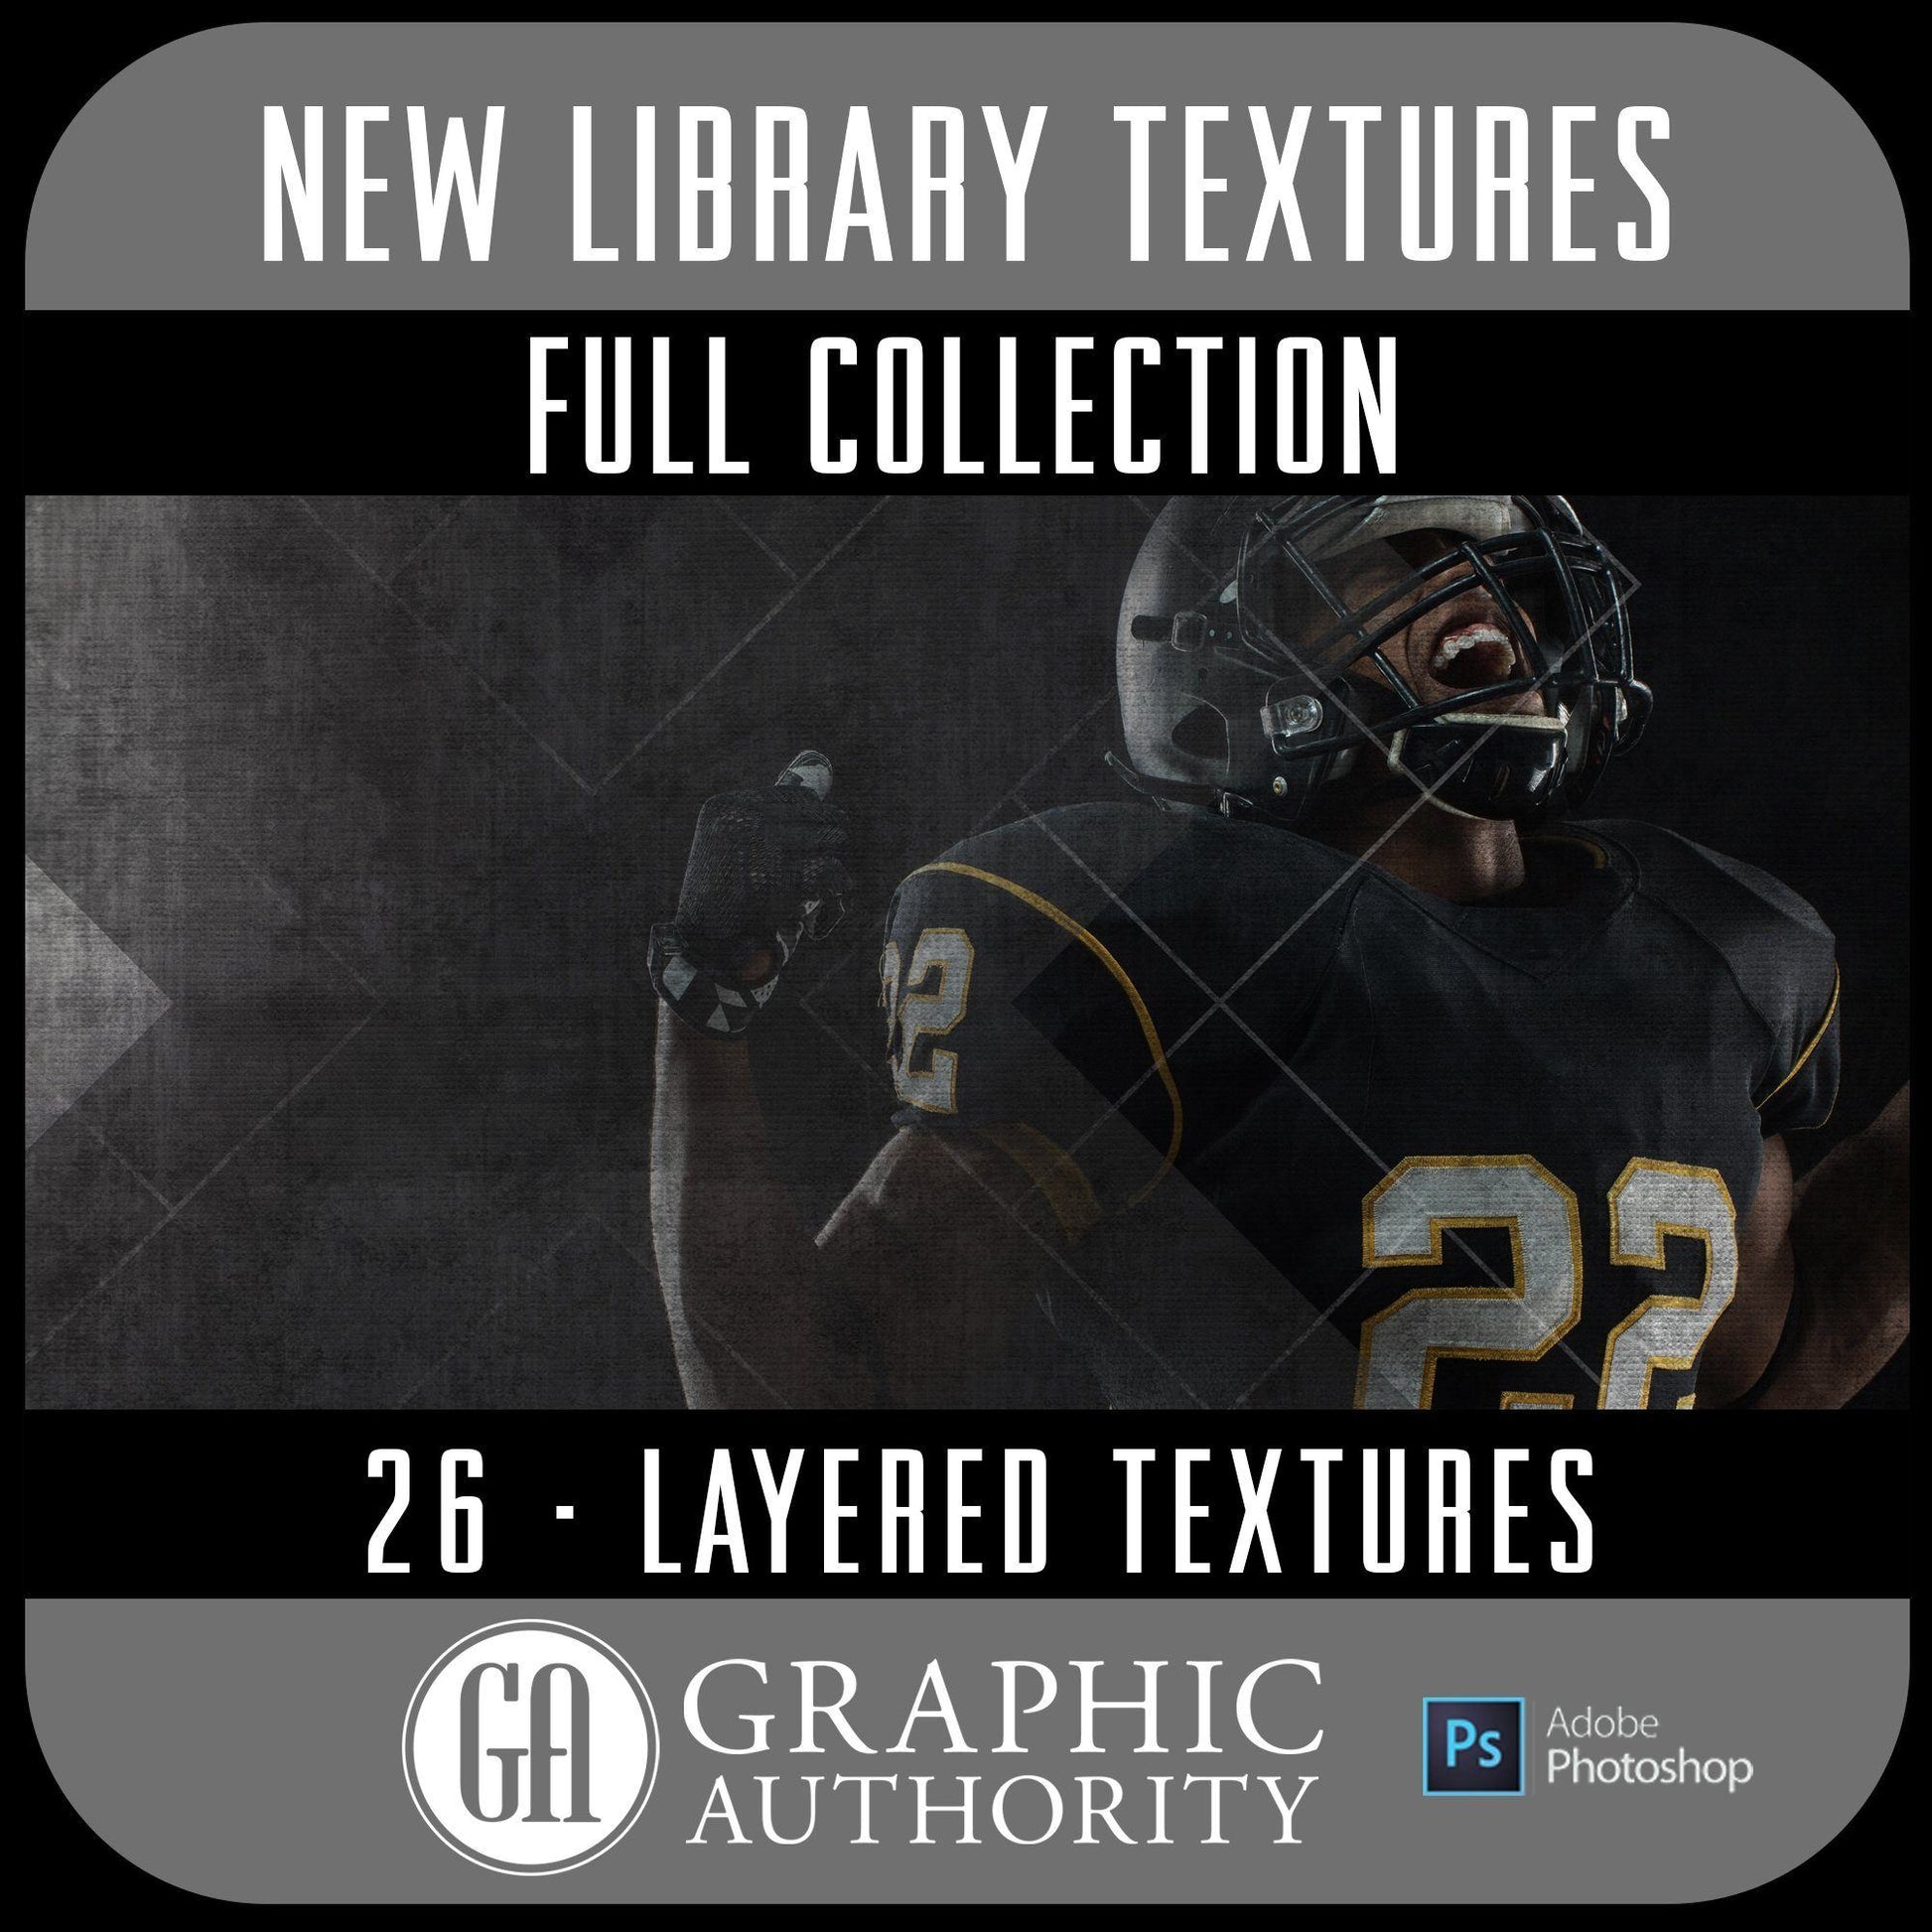 New Library - Layered Textures - Full Collection-Photoshop Template - Graphic Authority